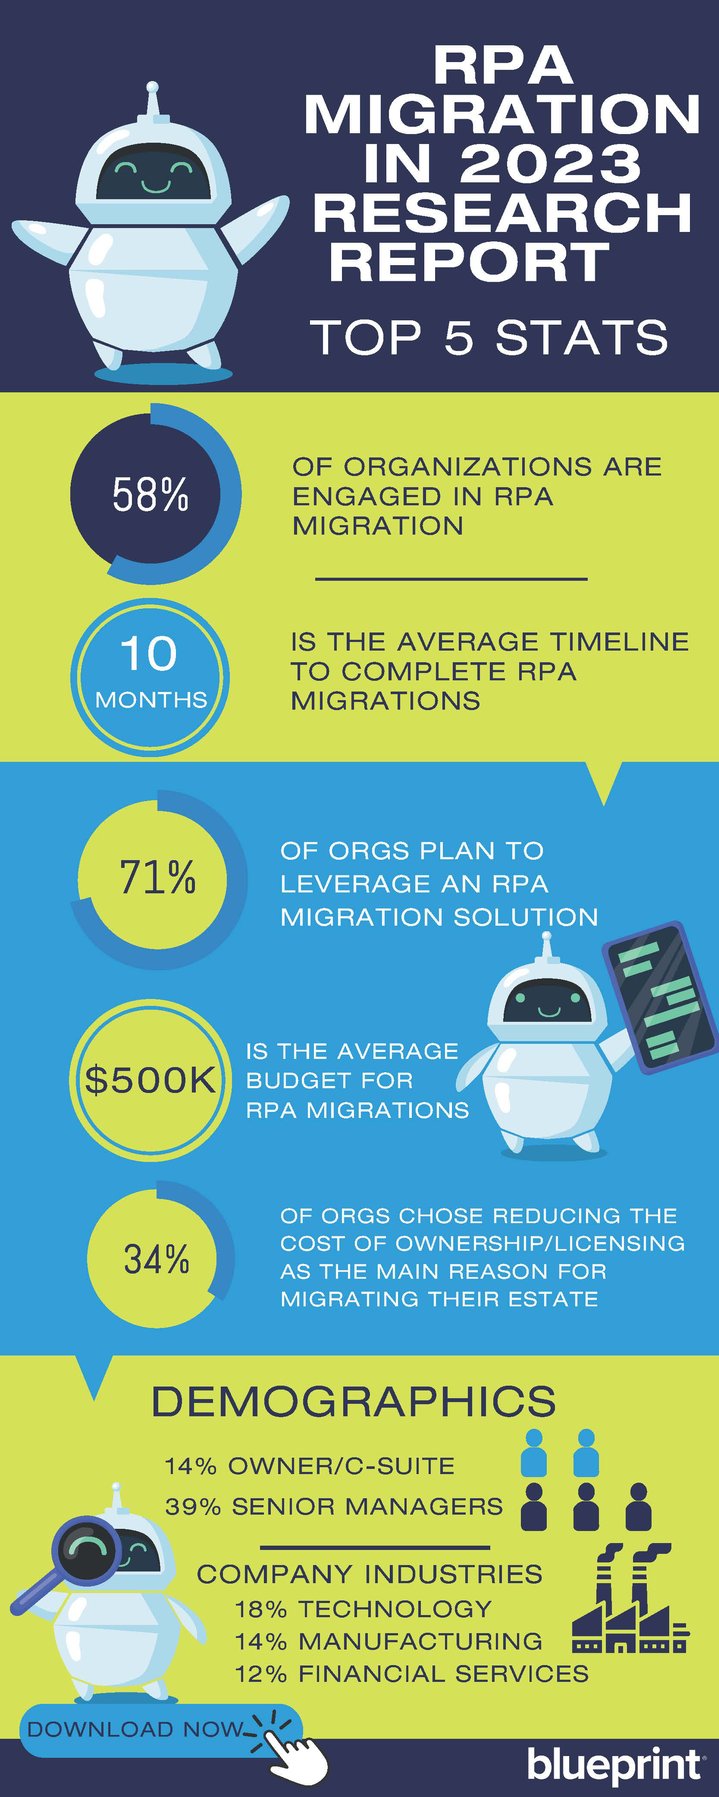 Infographic-RPA-Migration-in-2023-Research-Report-Top-5-Stats